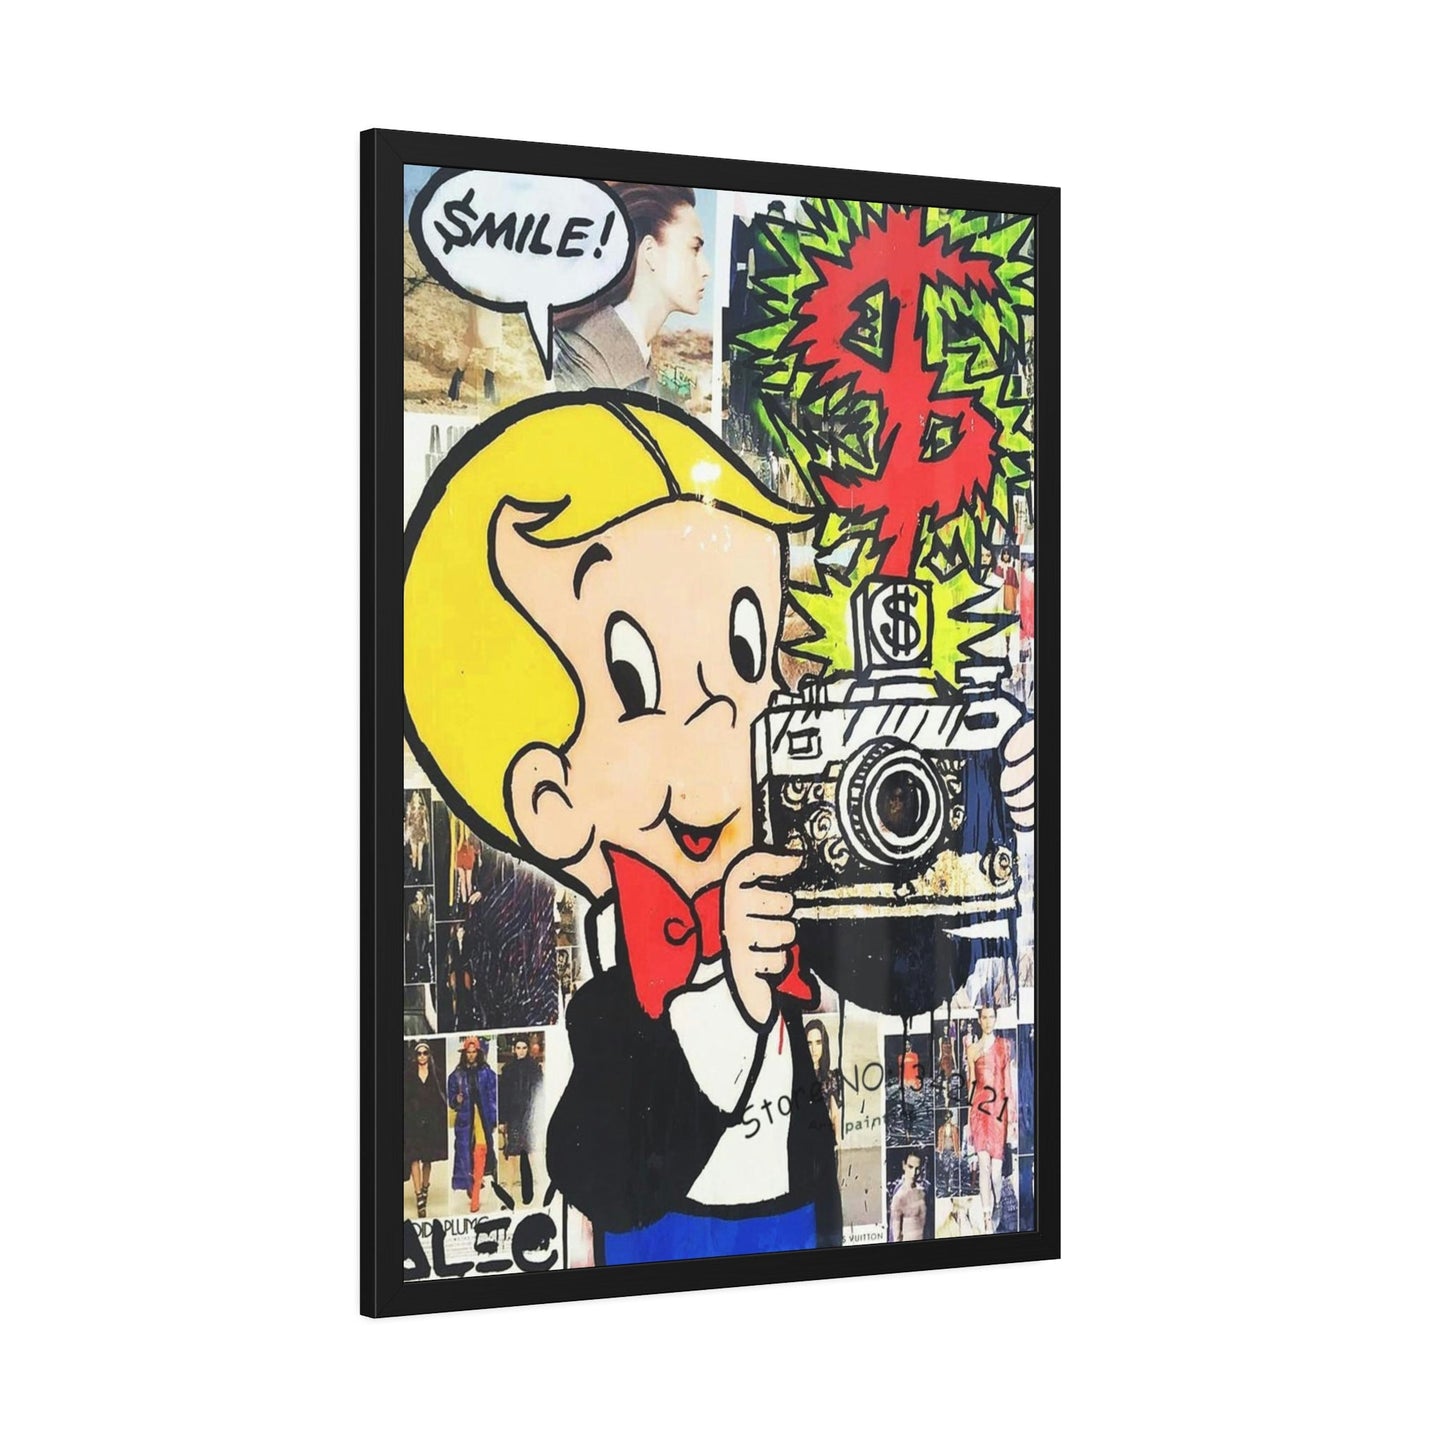 Colorful Wall Decor: Alec Monopoly's Art on Natural Canvas and Prints